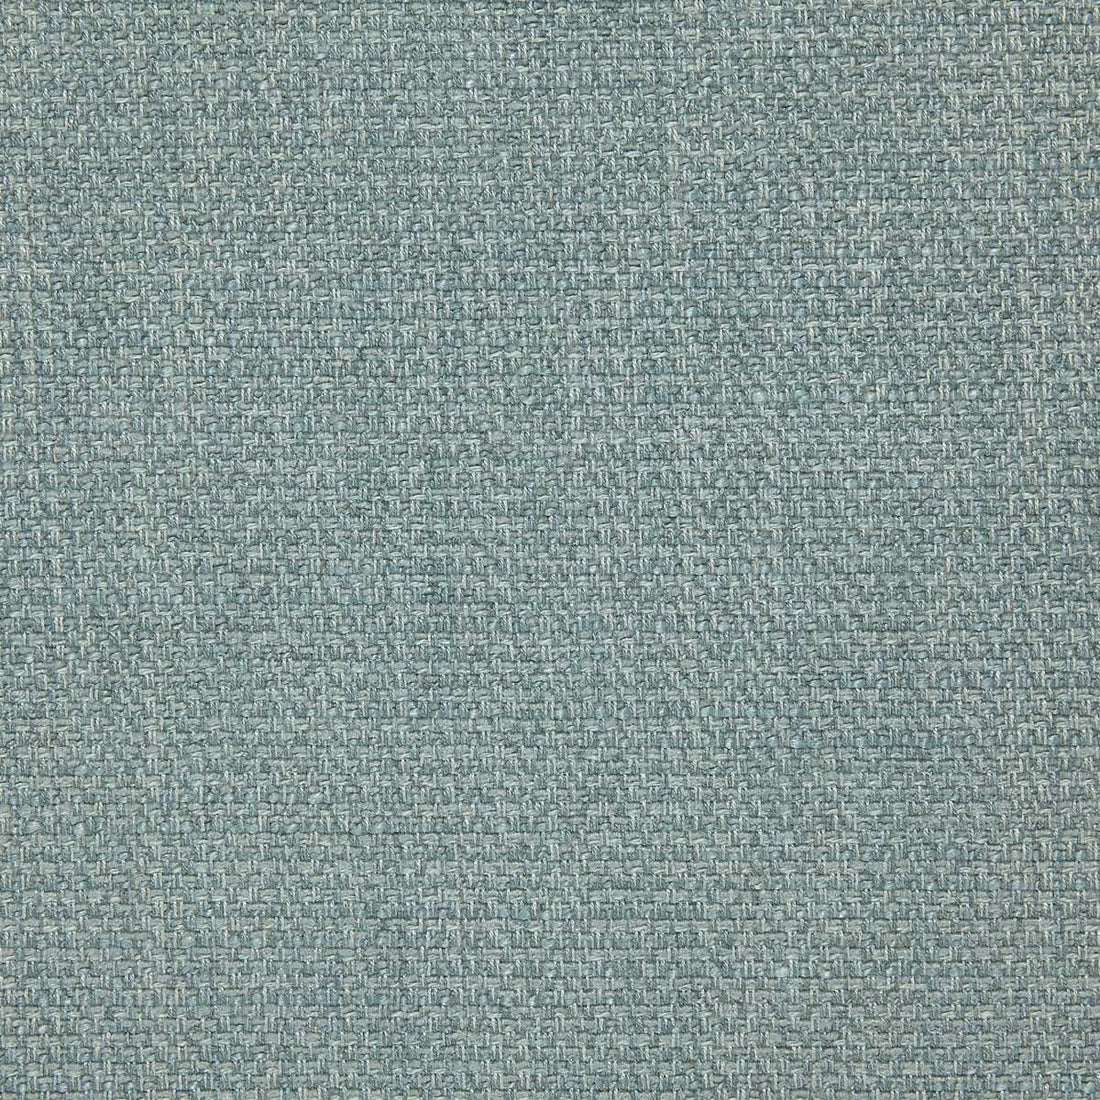 Godai fabric in 4 color - pattern LZ-30349.04.0 - by Kravet Design in the Lizzo collection